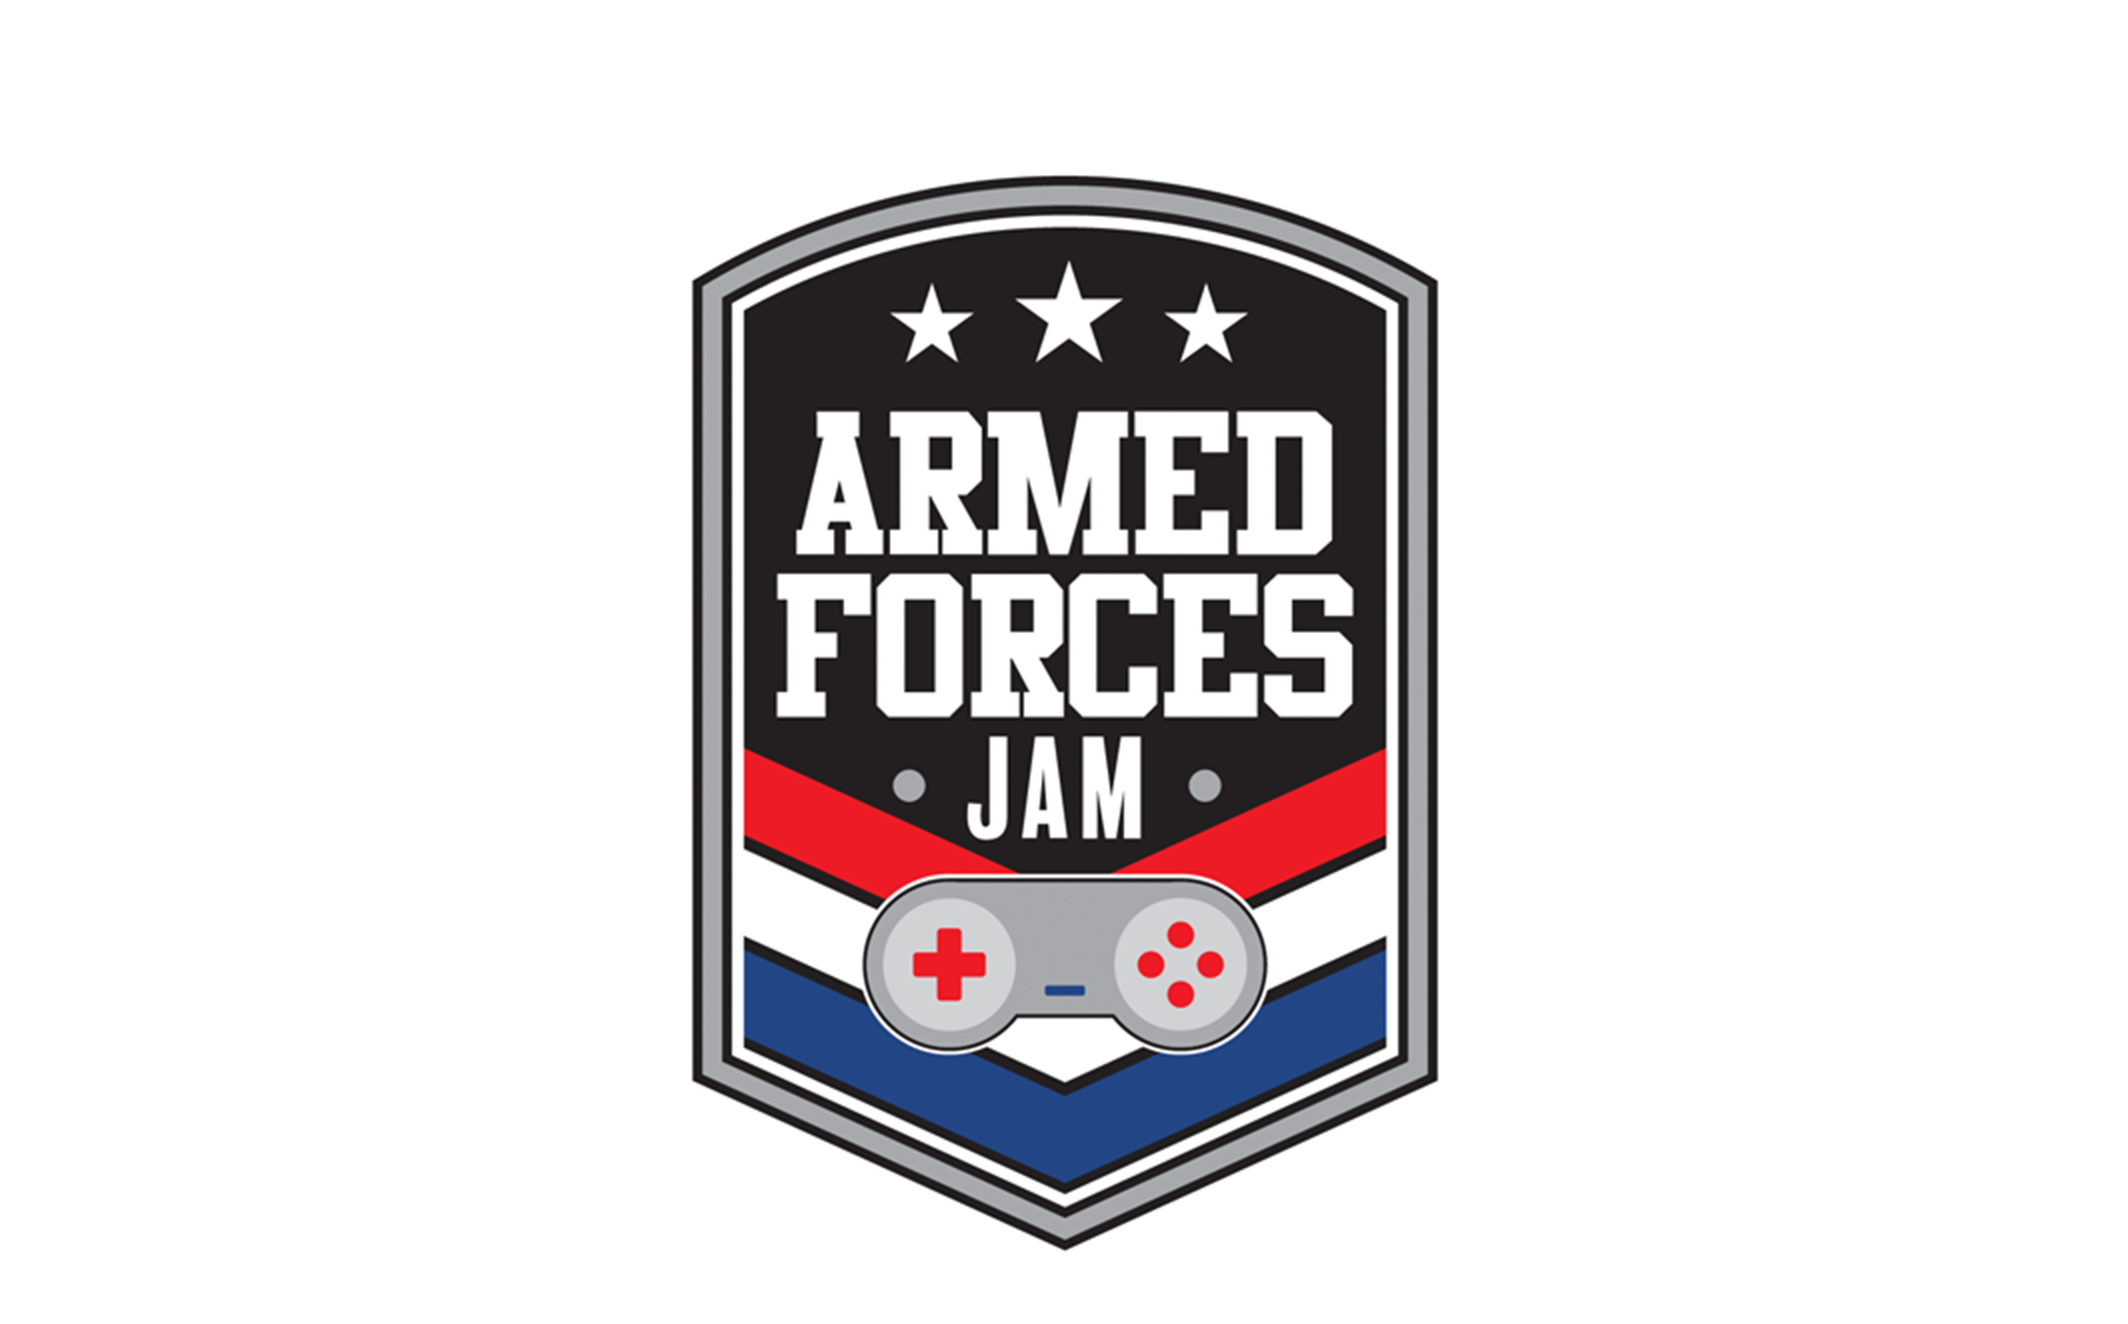 Image of Armed Forces Jam resource